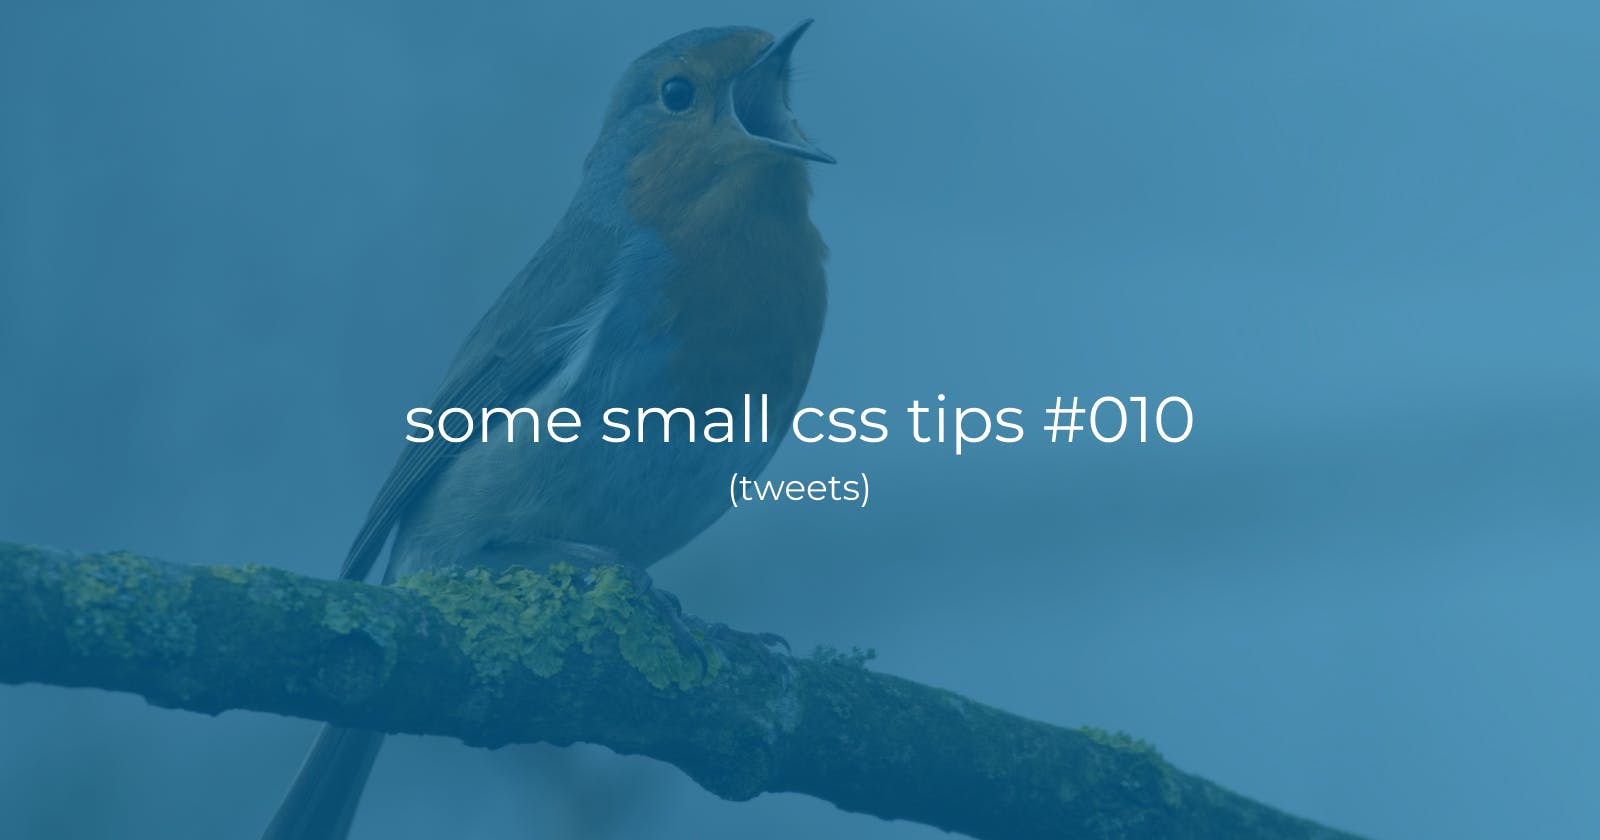 Some small Css tips #010